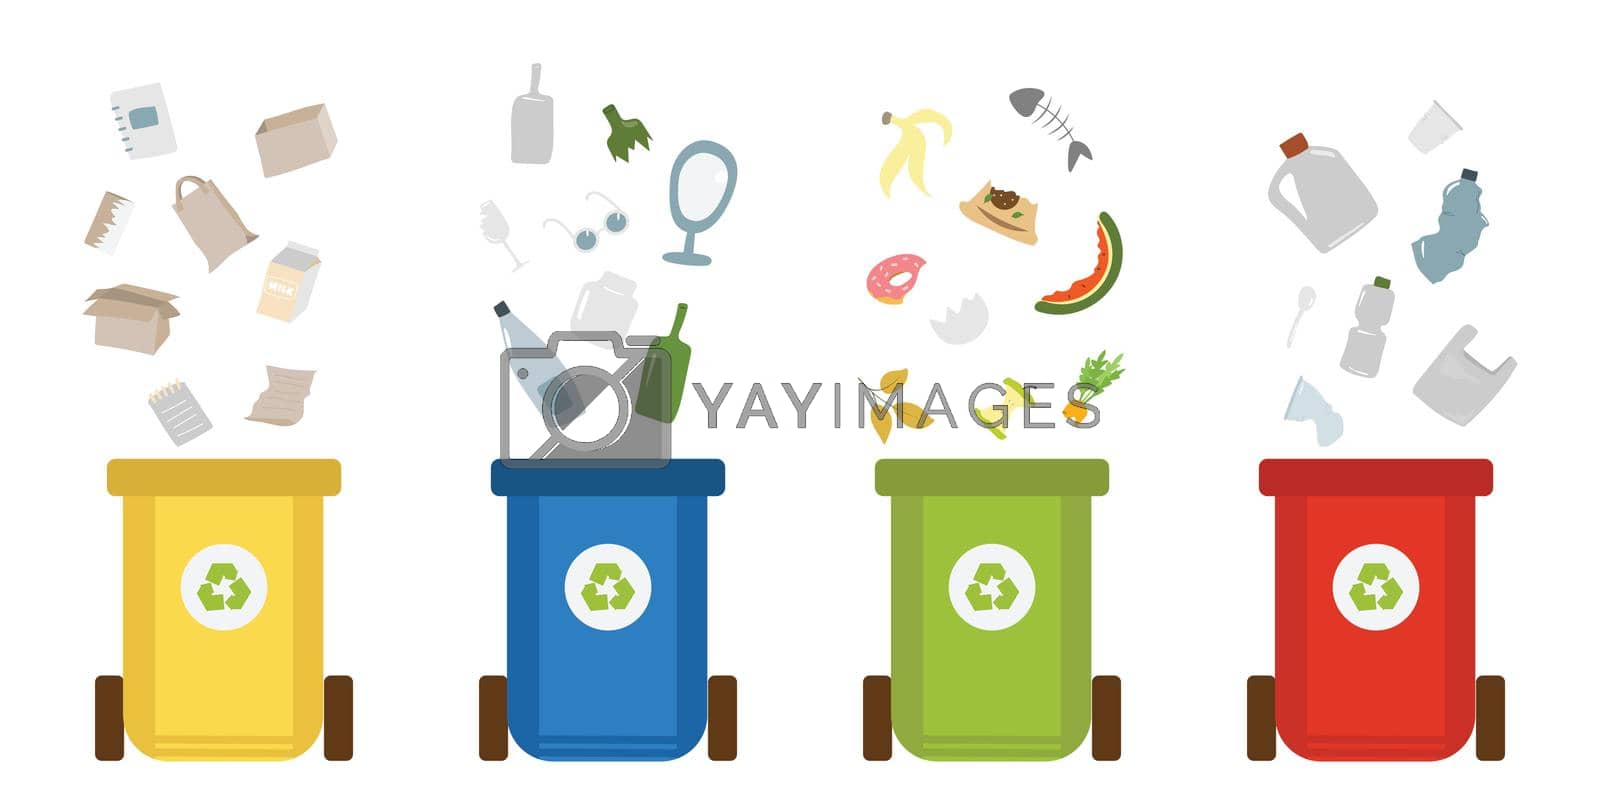 Royalty free image of Eco friendly vector by tan4ikk1